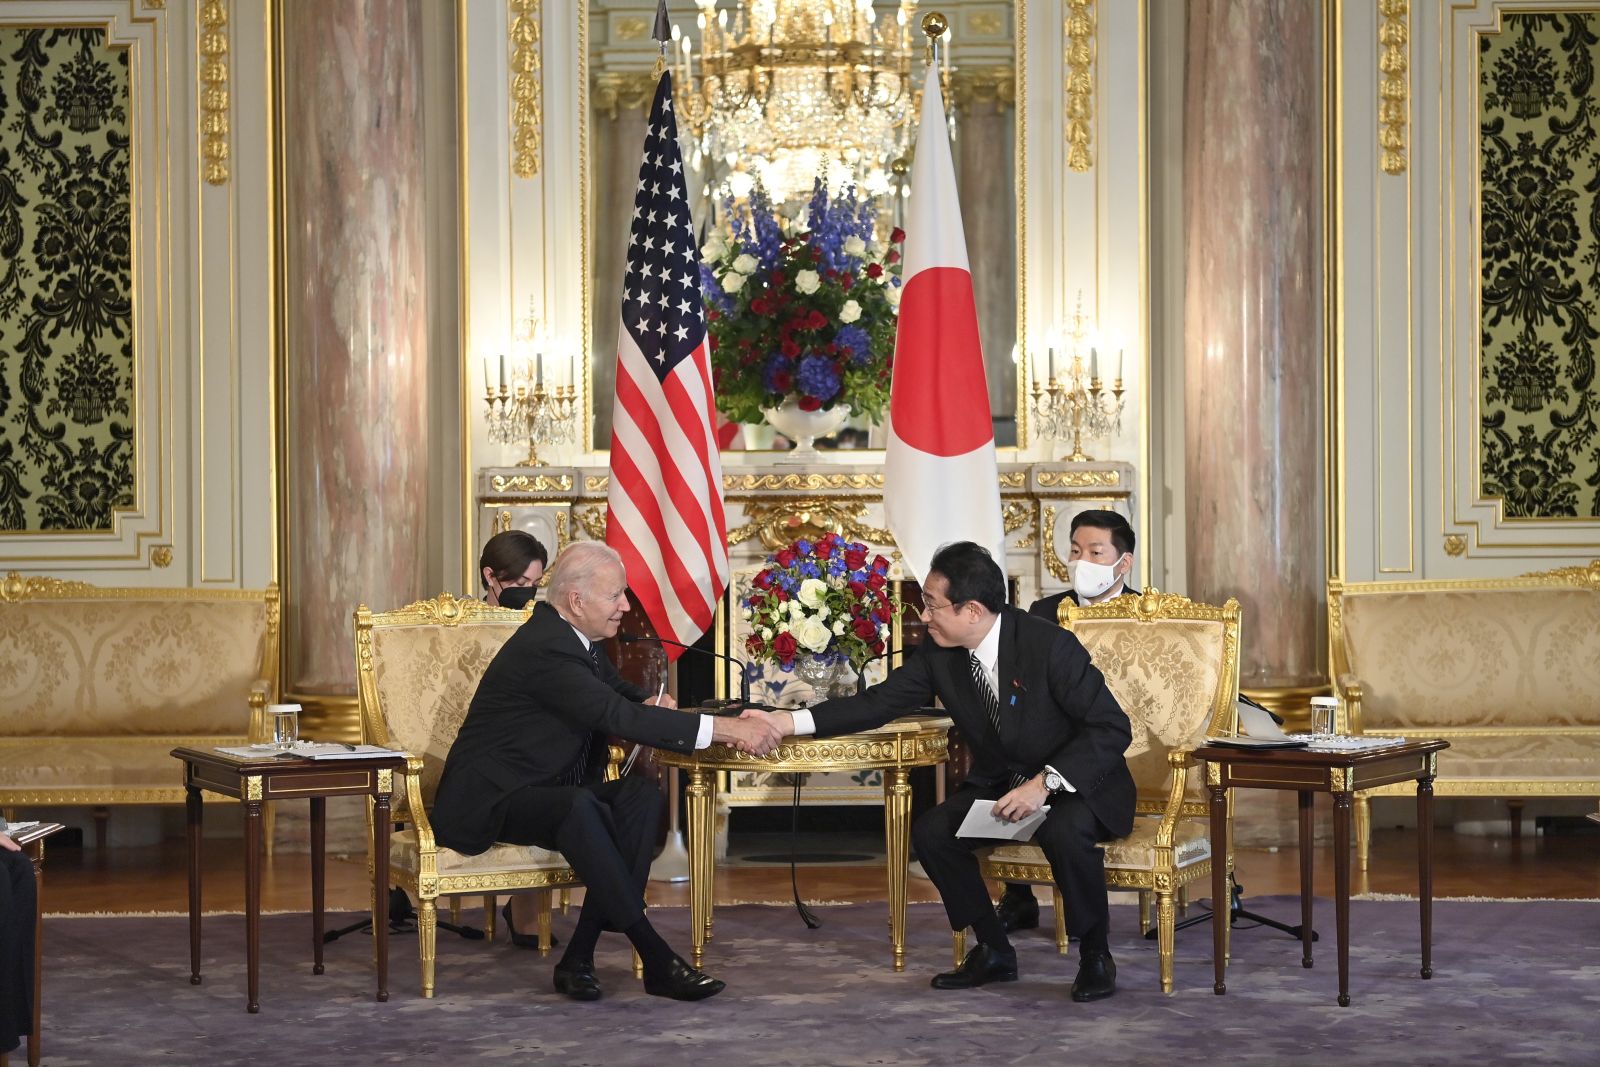 epa09968081 US President Joe Biden (L) and Japan's Prime Minister Fumio Kishida (R) attend the Japan-US summit meeting at Akasaka Palace State Guest House in Tokyo, Japan 23 May 2022. President Biden is visiting Japan within the QUAD summit of the Indo-Pacific countries - United States, Japan, Australia, India - that will be held in Tokyo on the 24 May.  EPA/DAVID MAREUIL / POOL